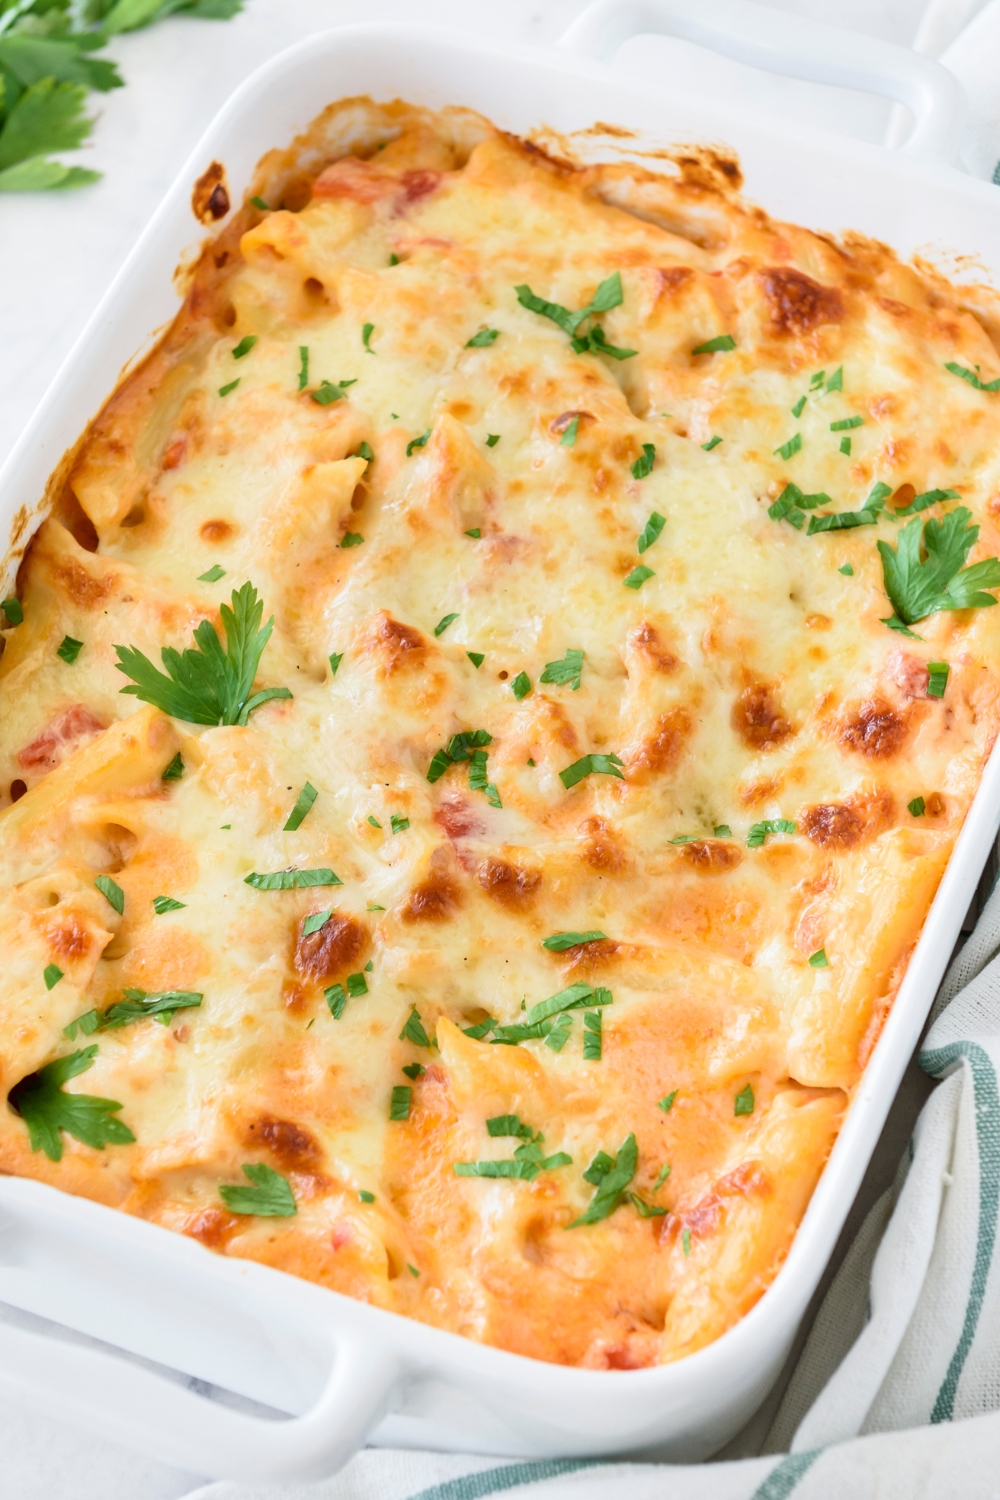 A baking dish filled with freshly baked casserole covered in melted cheese and fresh green herbs.